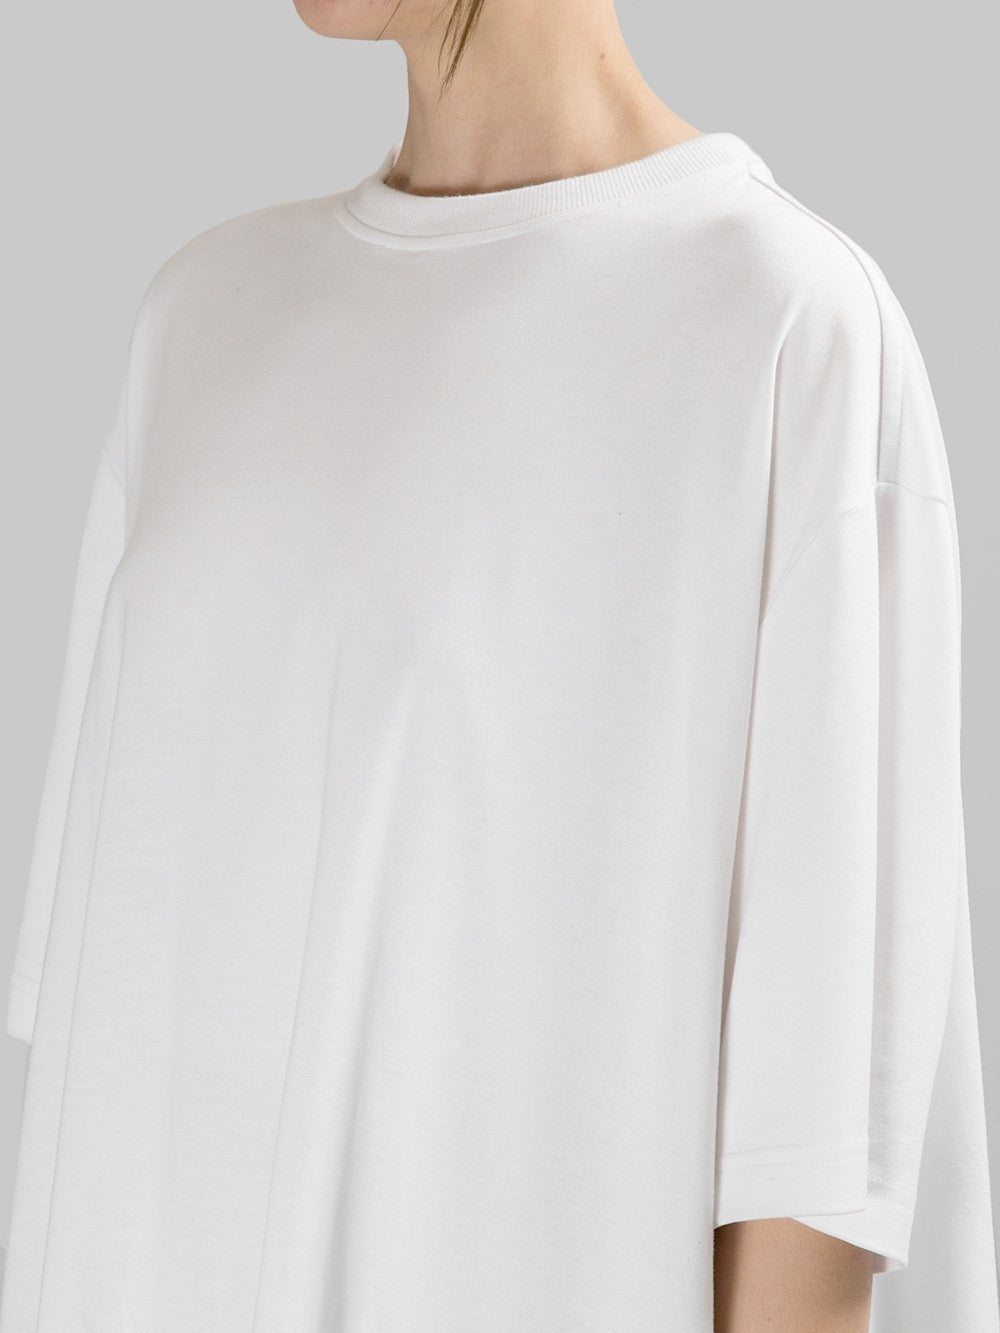 Asymmetrical Side Big Slit Viscose Cotton Oversized Relax Fit Top